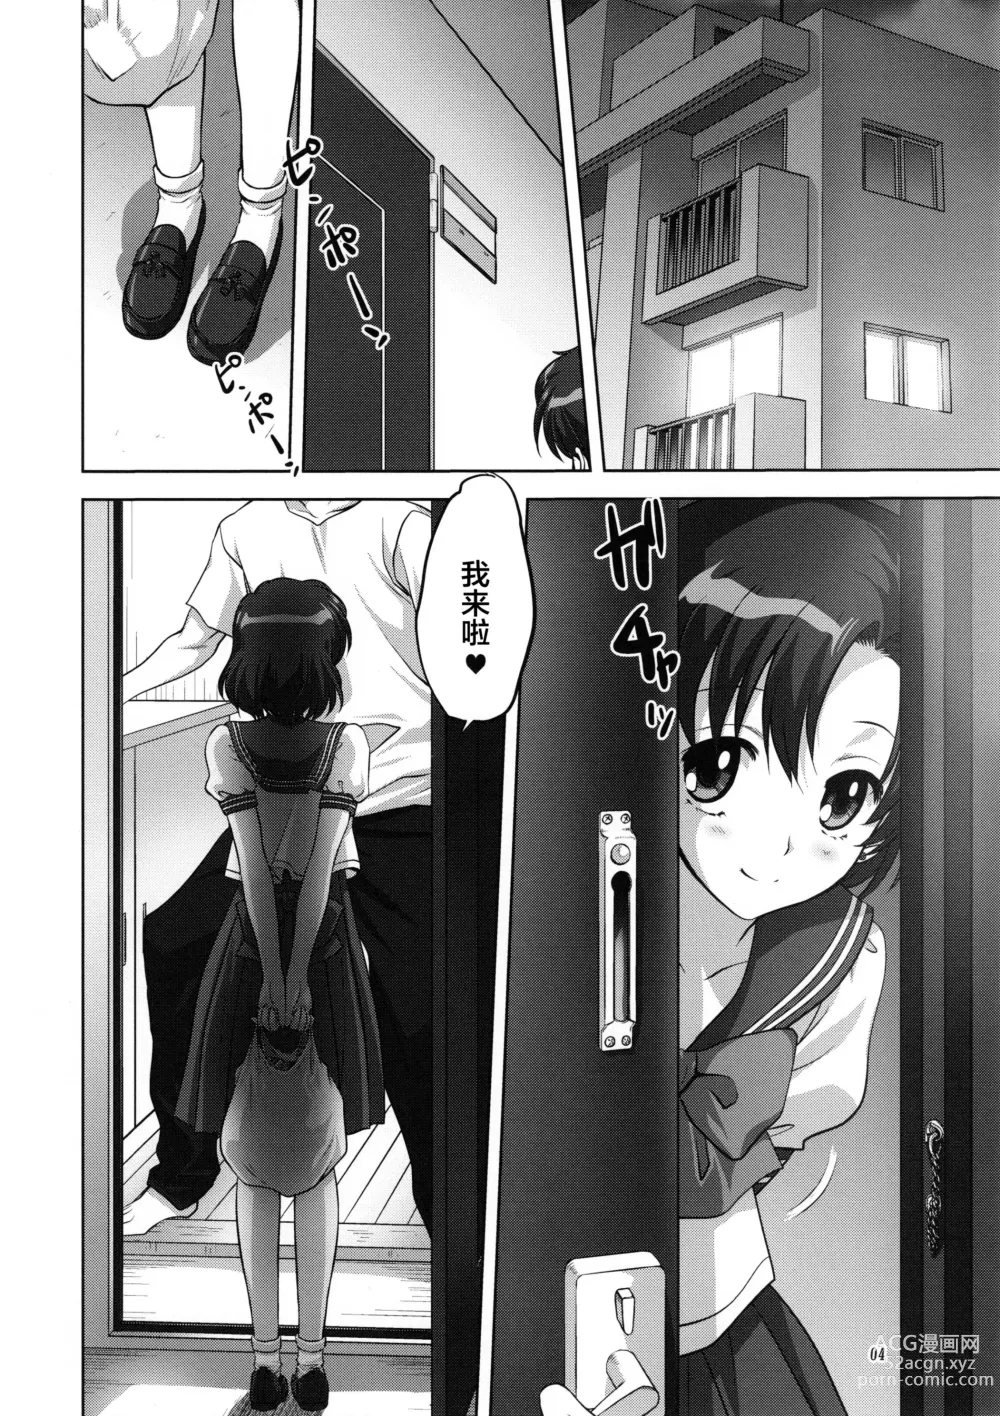 Page 4 of doujinshi Ami-chan to Issho (decensored)